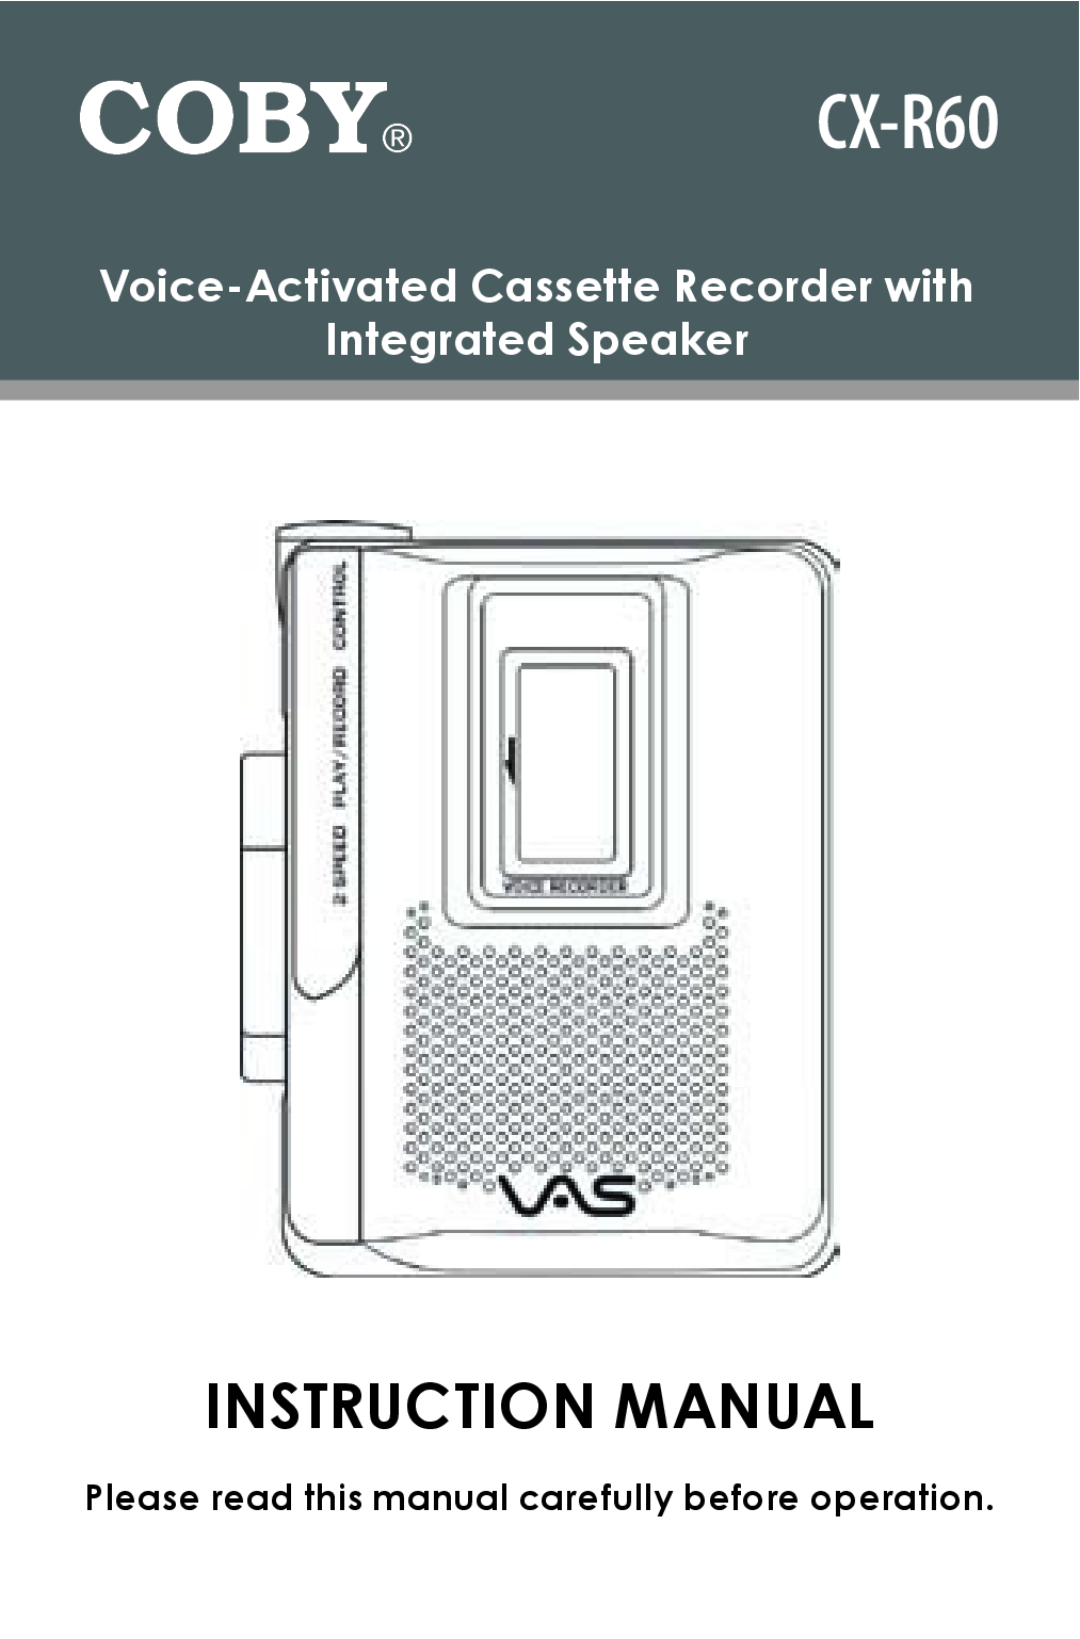 COBY electronic CX-R60 instruction manual Voice-ActivatedCassette Recorder with, Integrated Speaker 